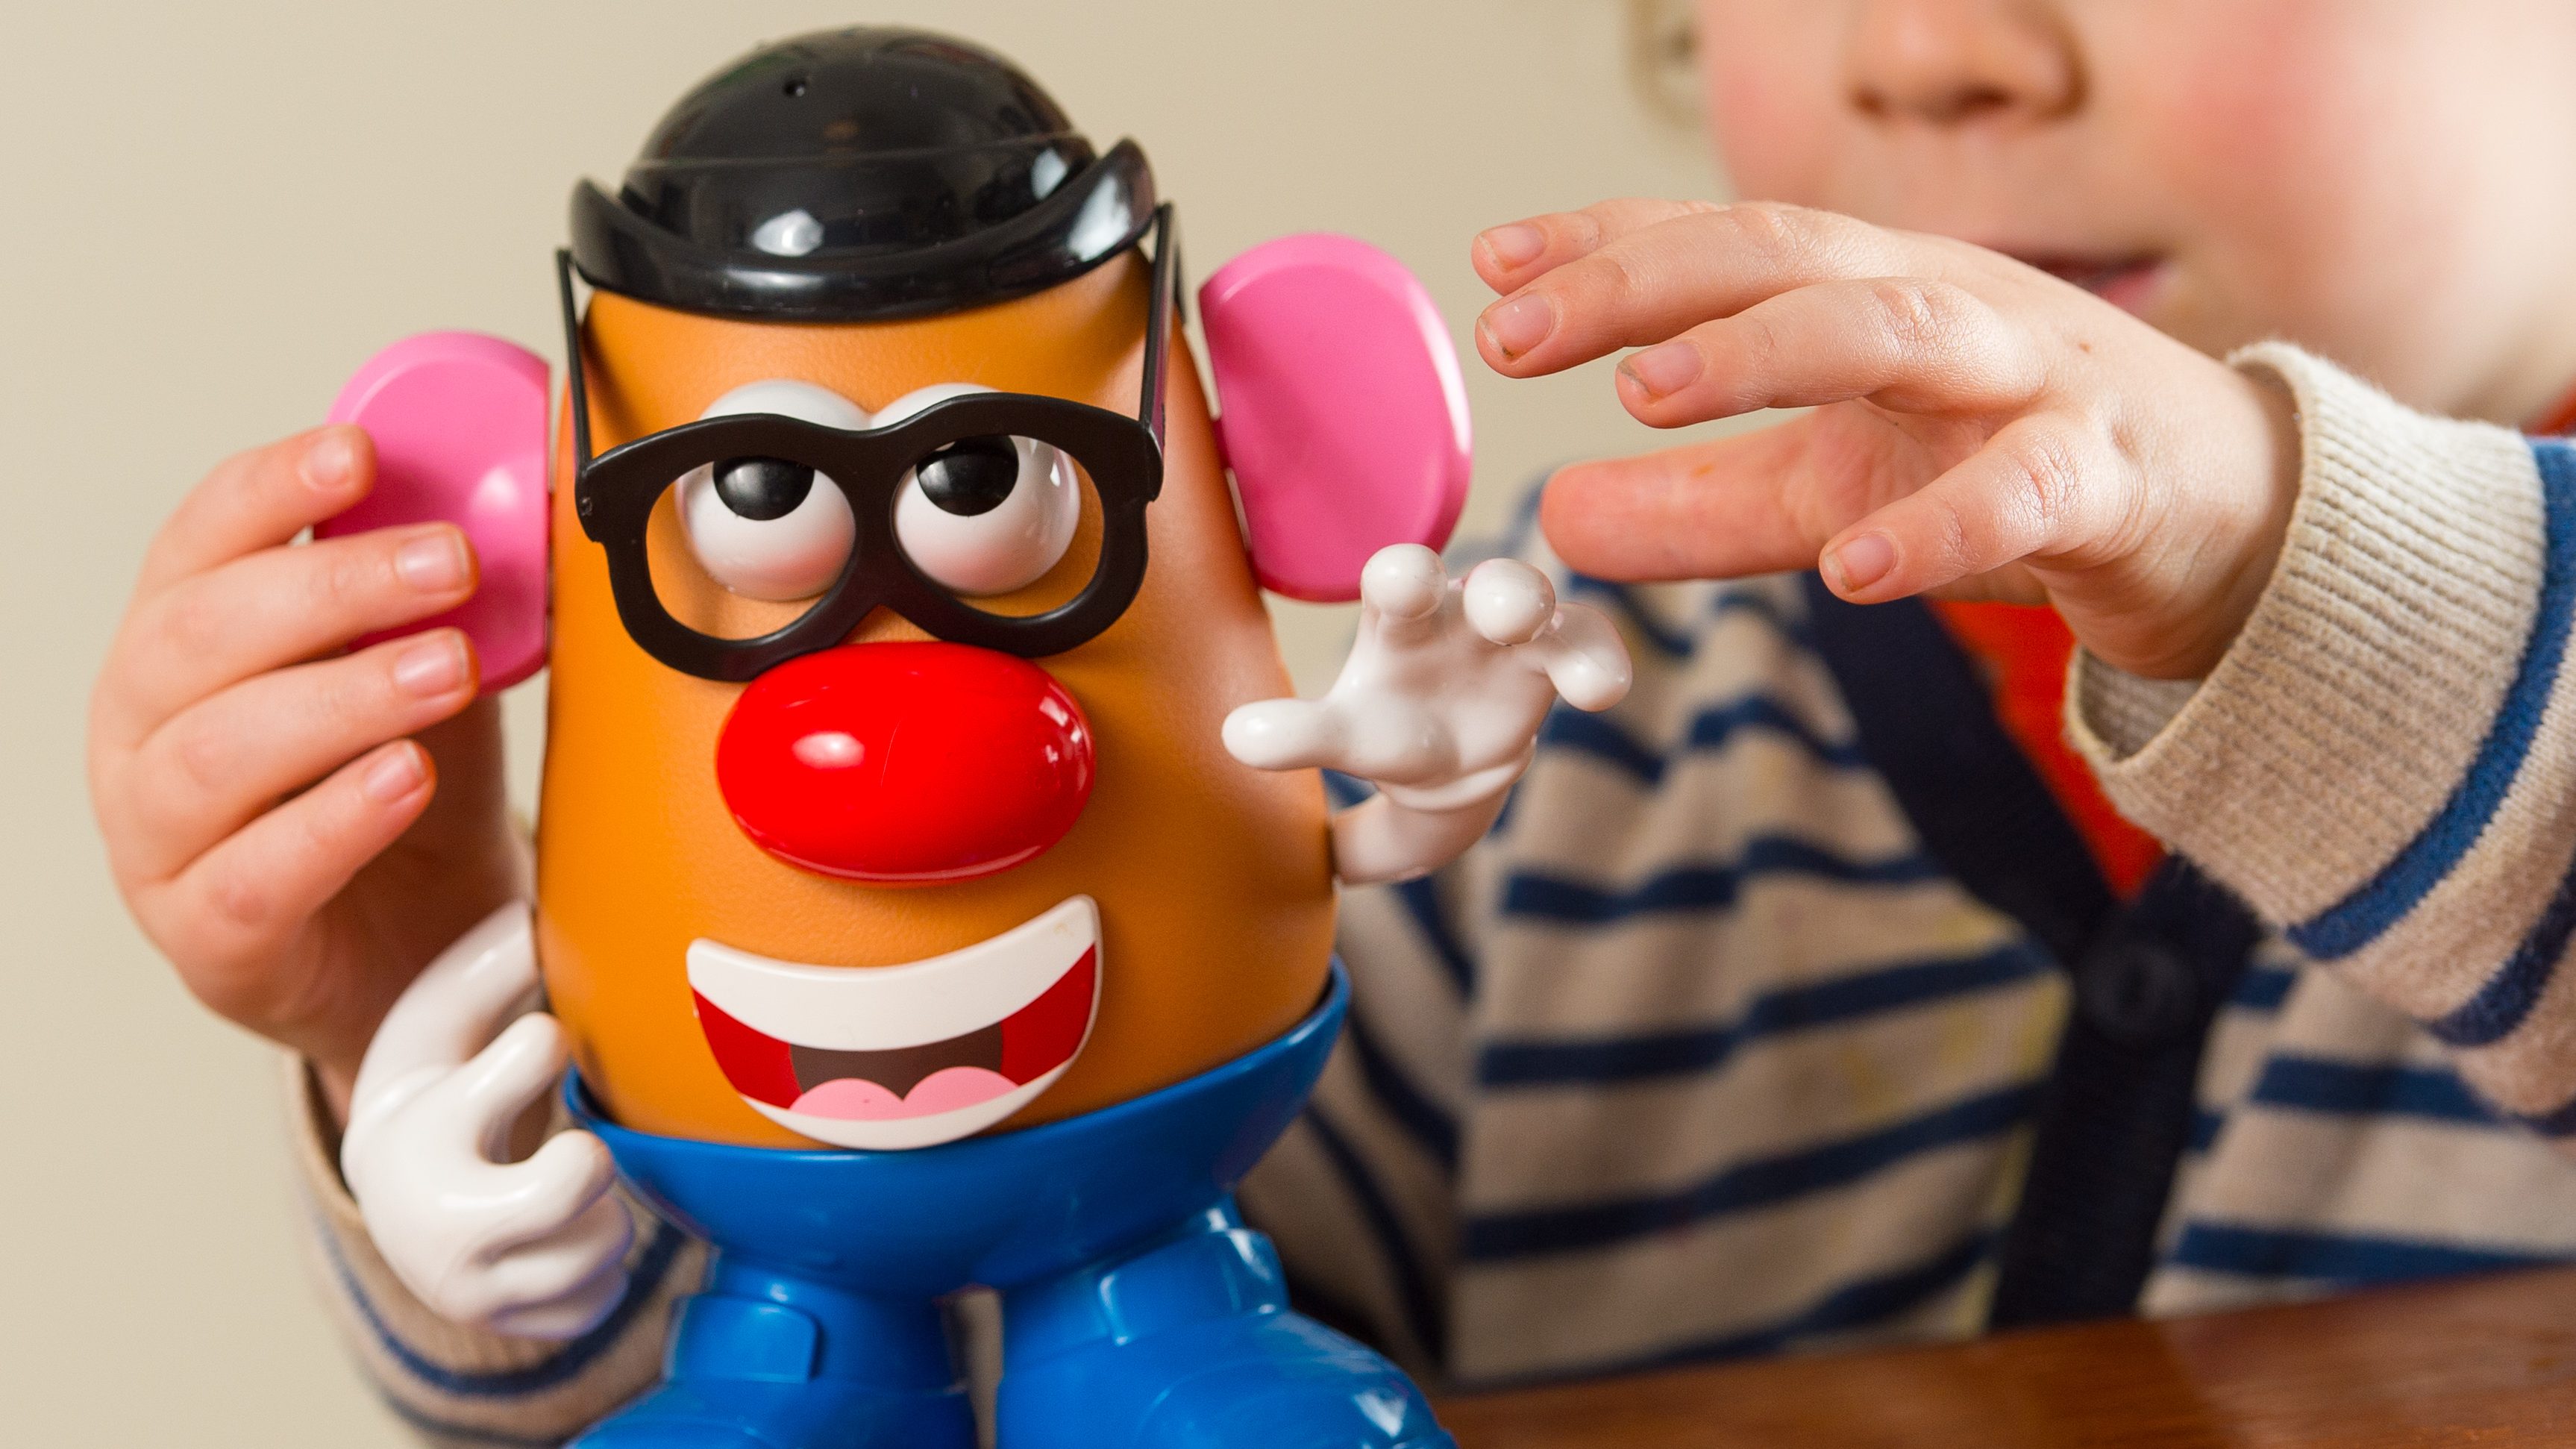 'Potato Head' the iconic Hasbro character and toy will have changes. Stock photo.